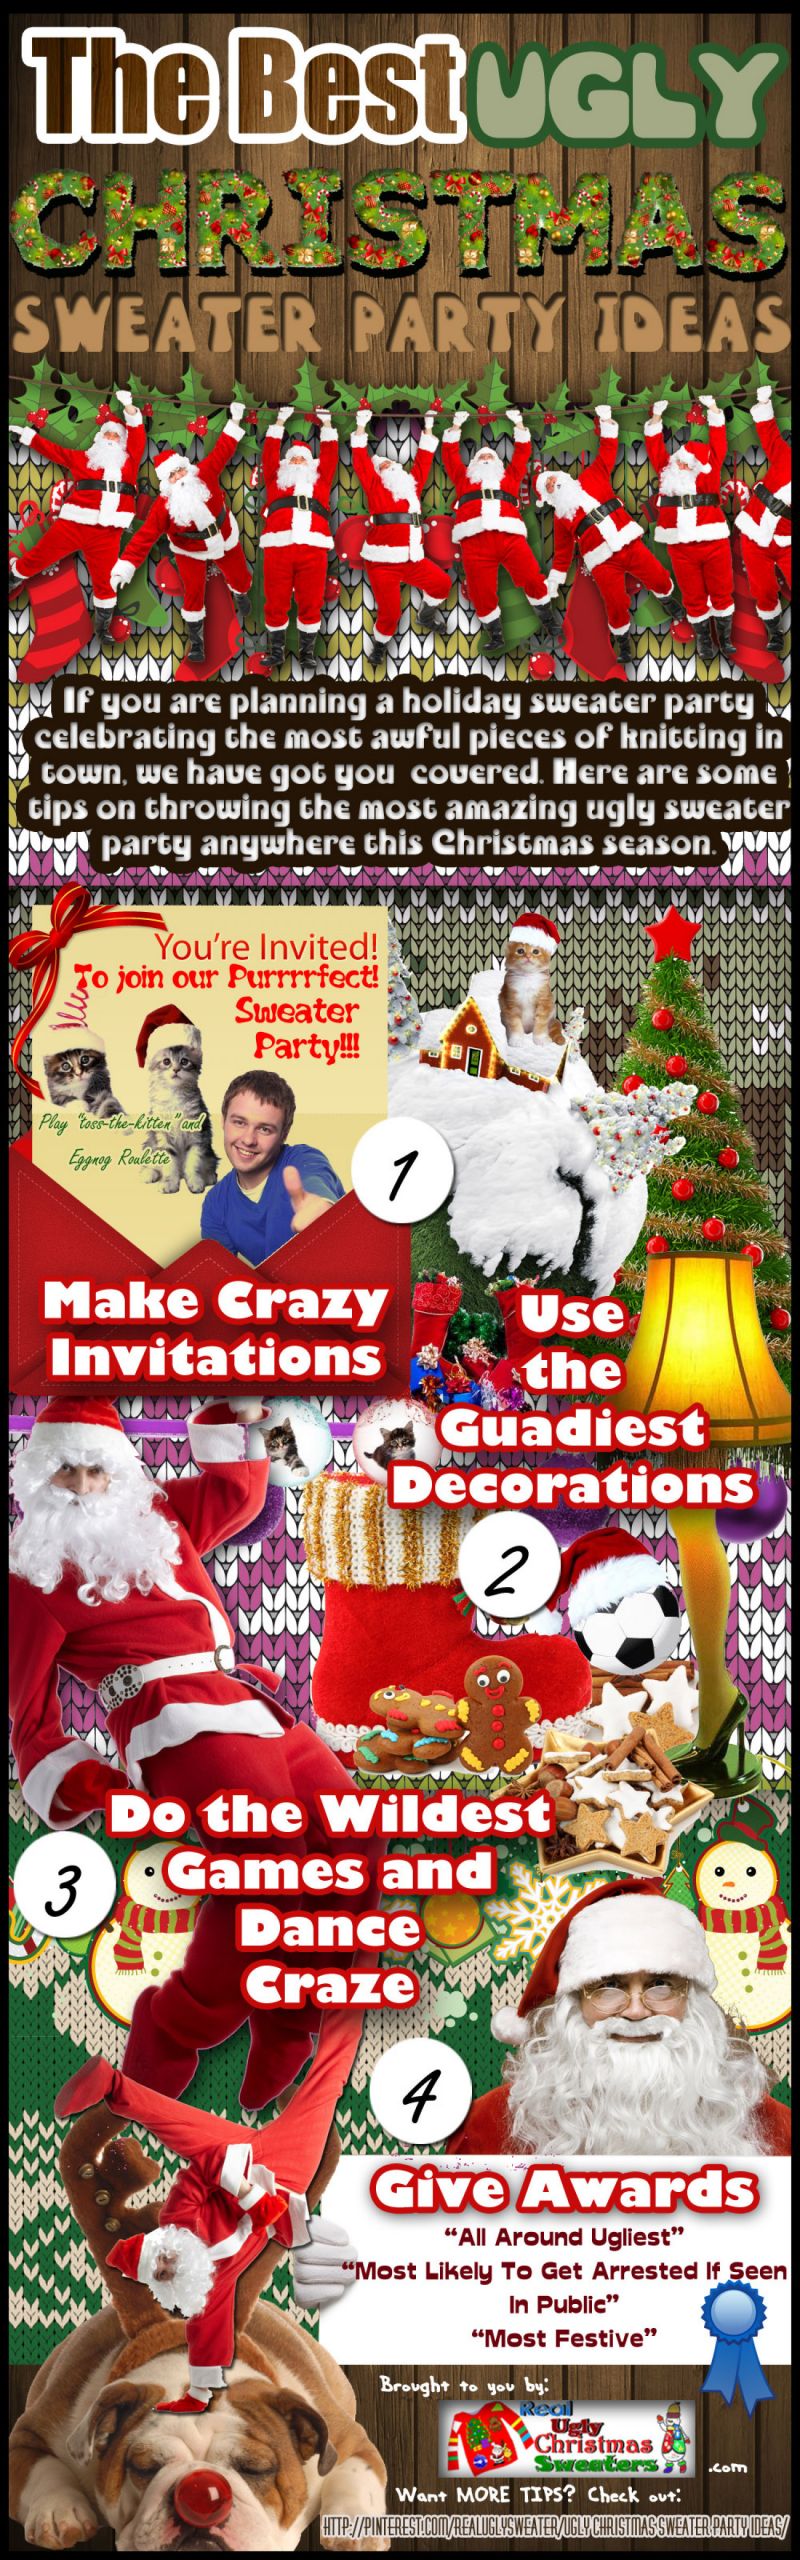 Holiday Ugly Sweater Party Ideas
 The Best Ugly Christmas Sweater Party Ideas